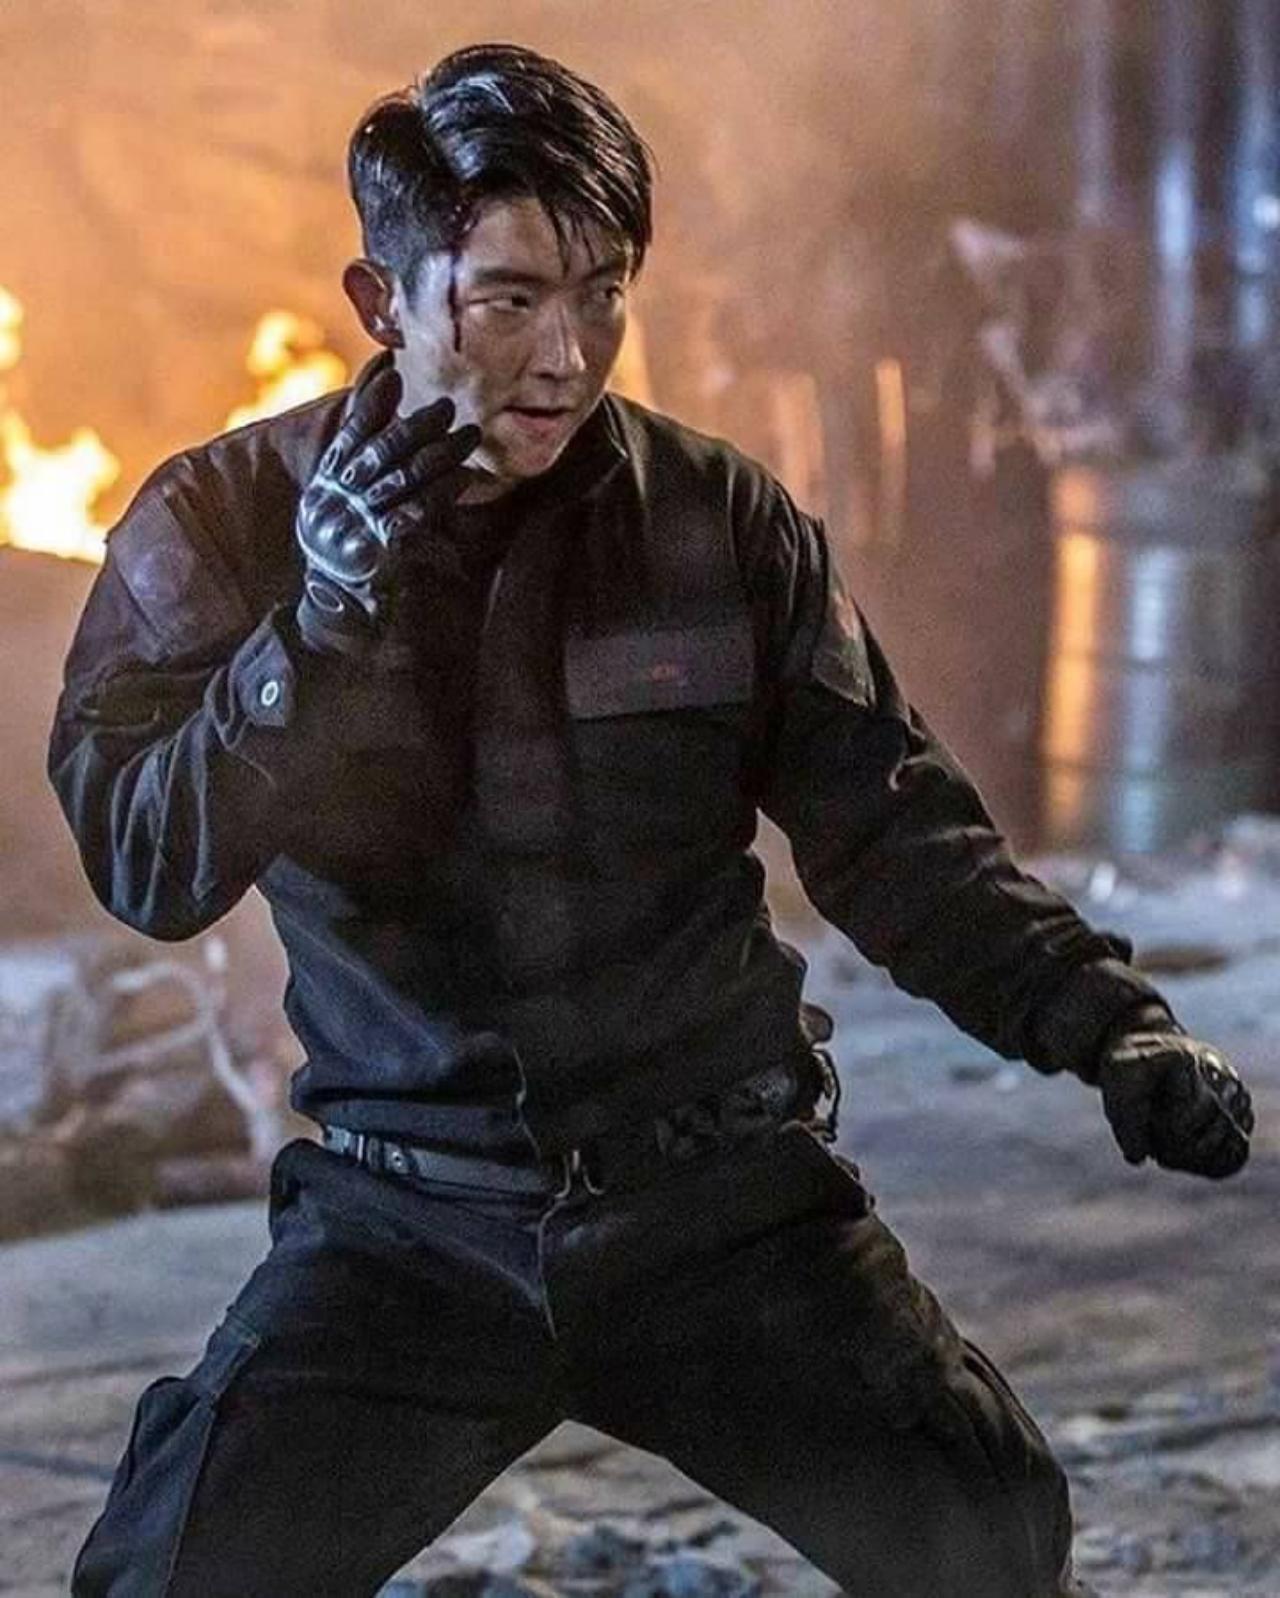 Joon-gi a talented action figure, and rarely uses stunt doubles. In 'Resident Evil: The Final Chapter,' Lee Joon-gi made his Hollywood debut, demonstrating his martial arts skills. Despite receiving mixed reviews, the film went on to become the highest-grossing entry in the entire franchise